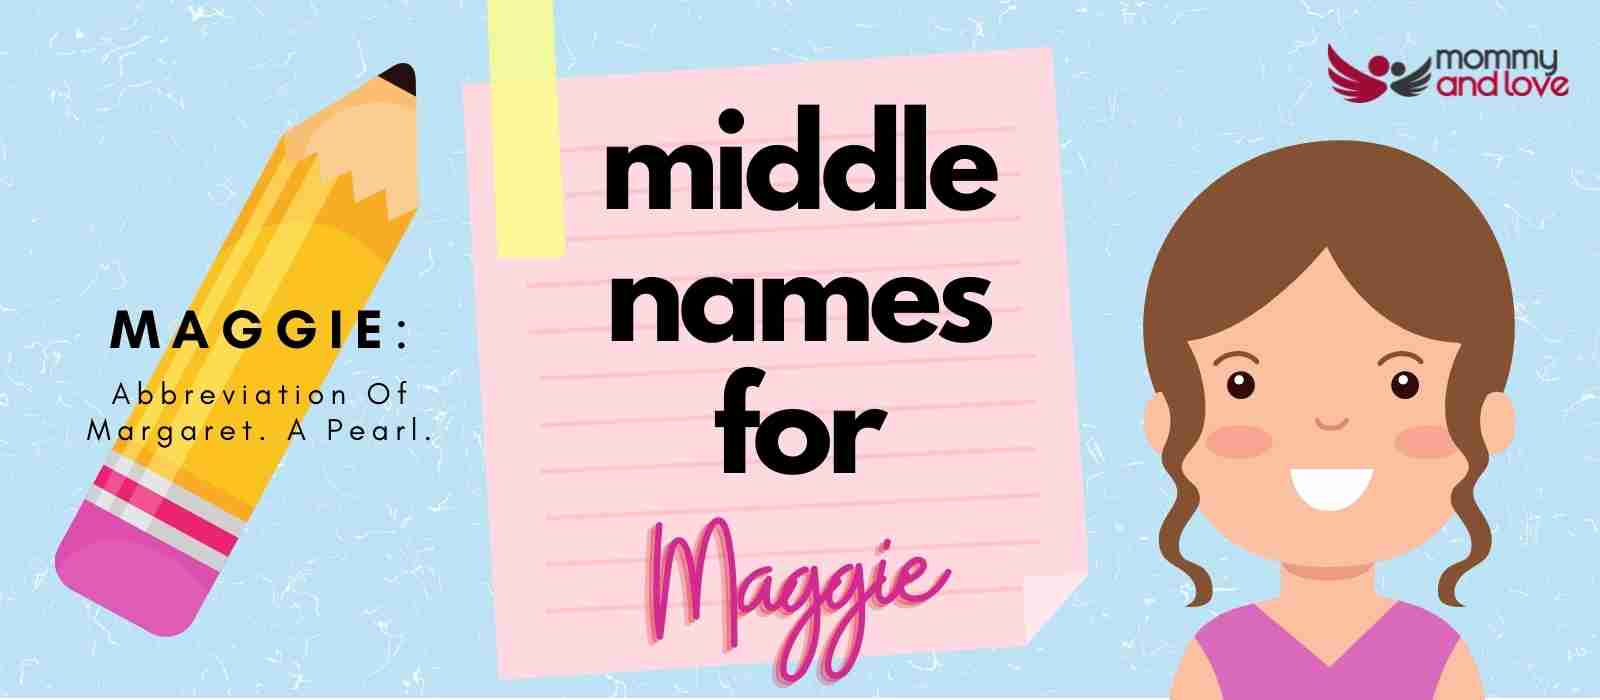 Middle Names for Maggie